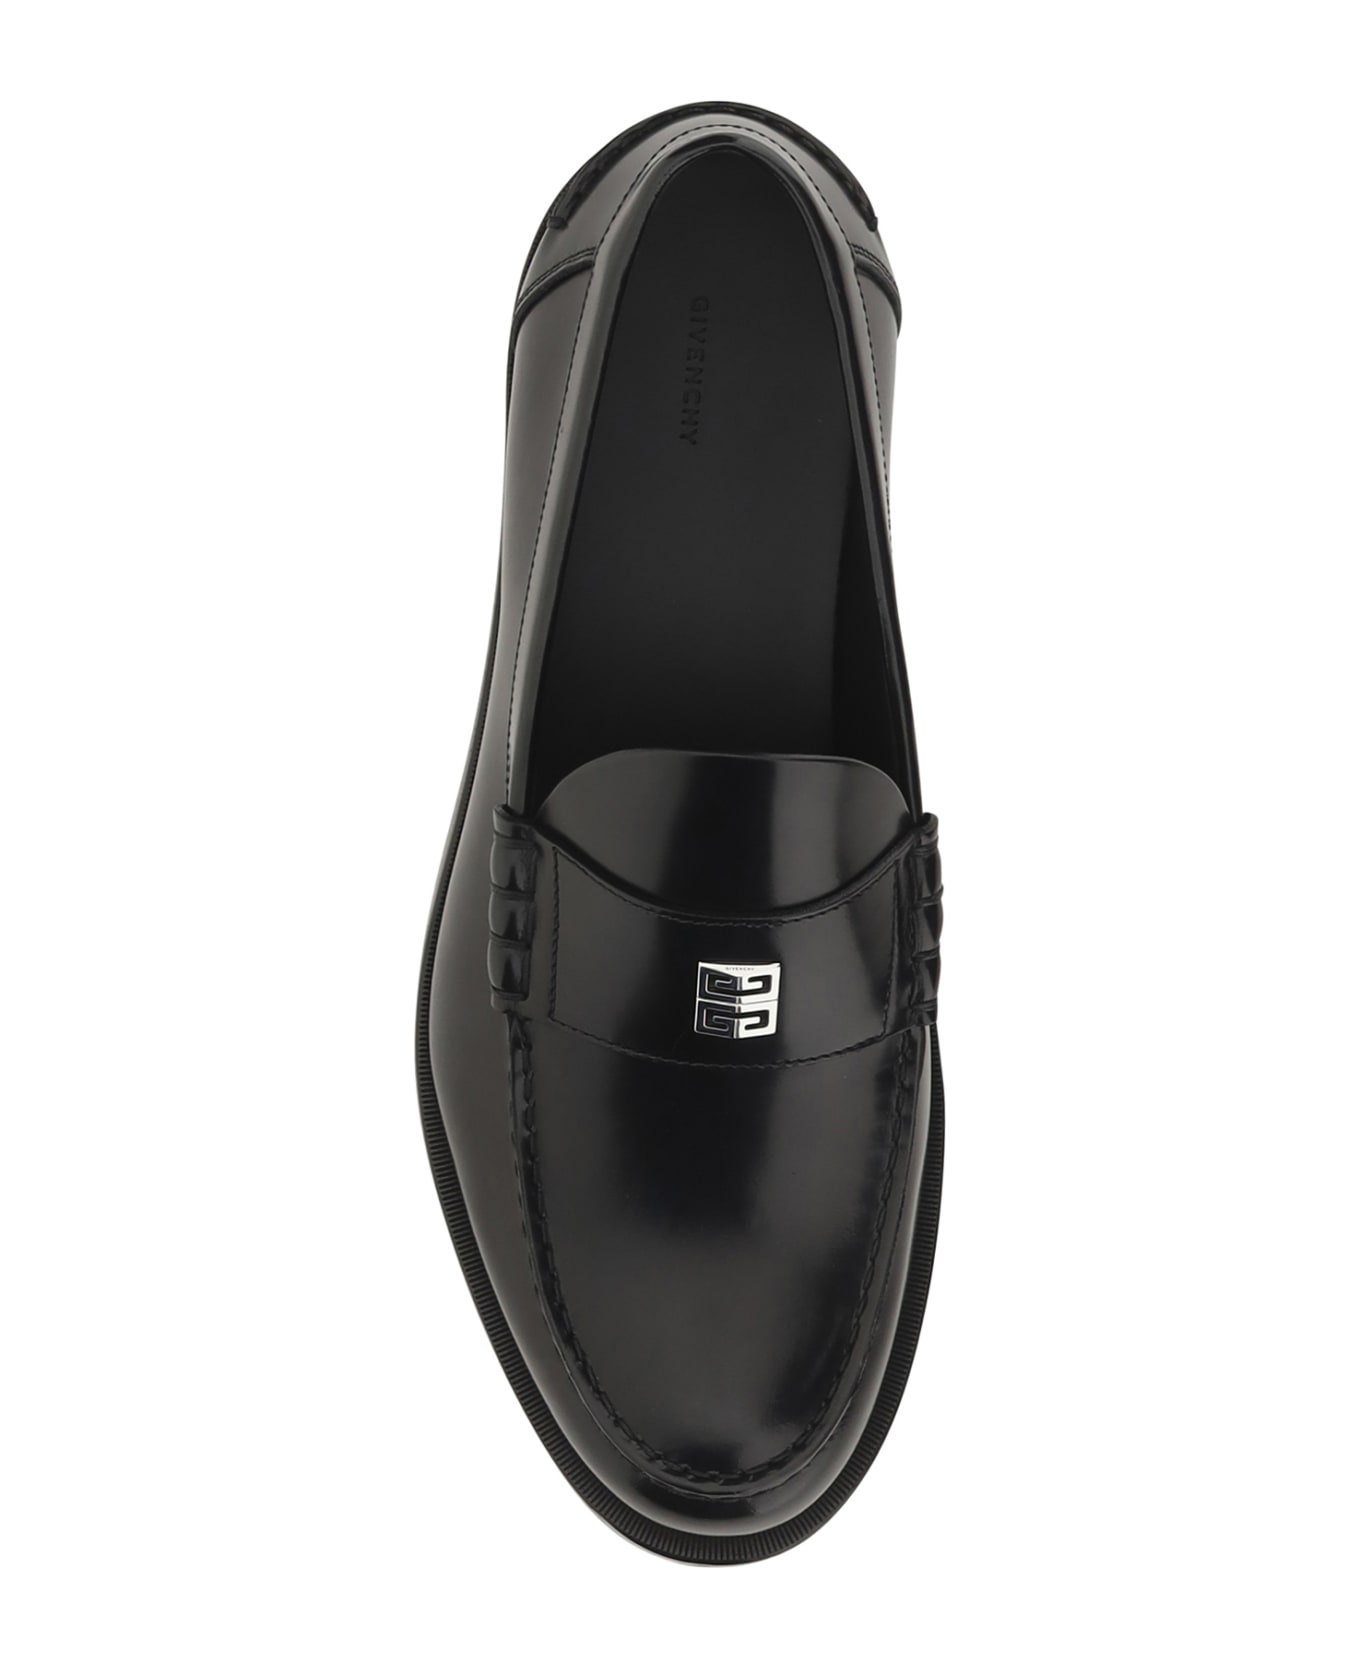 Givenchy Loafers - Black